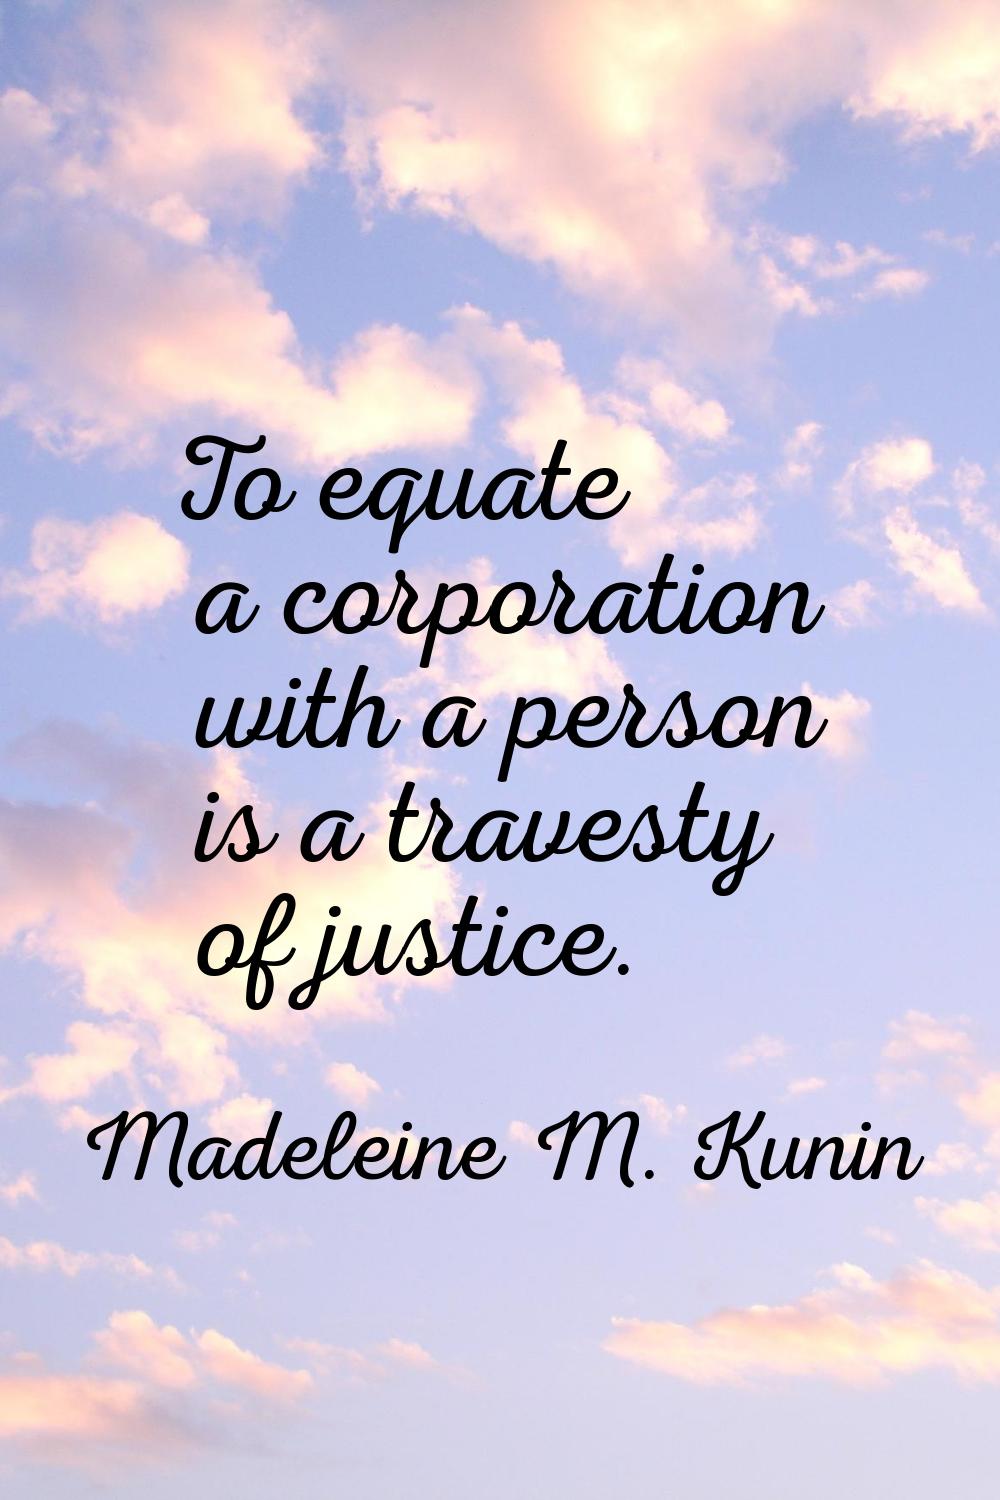 To equate a corporation with a person is a travesty of justice.